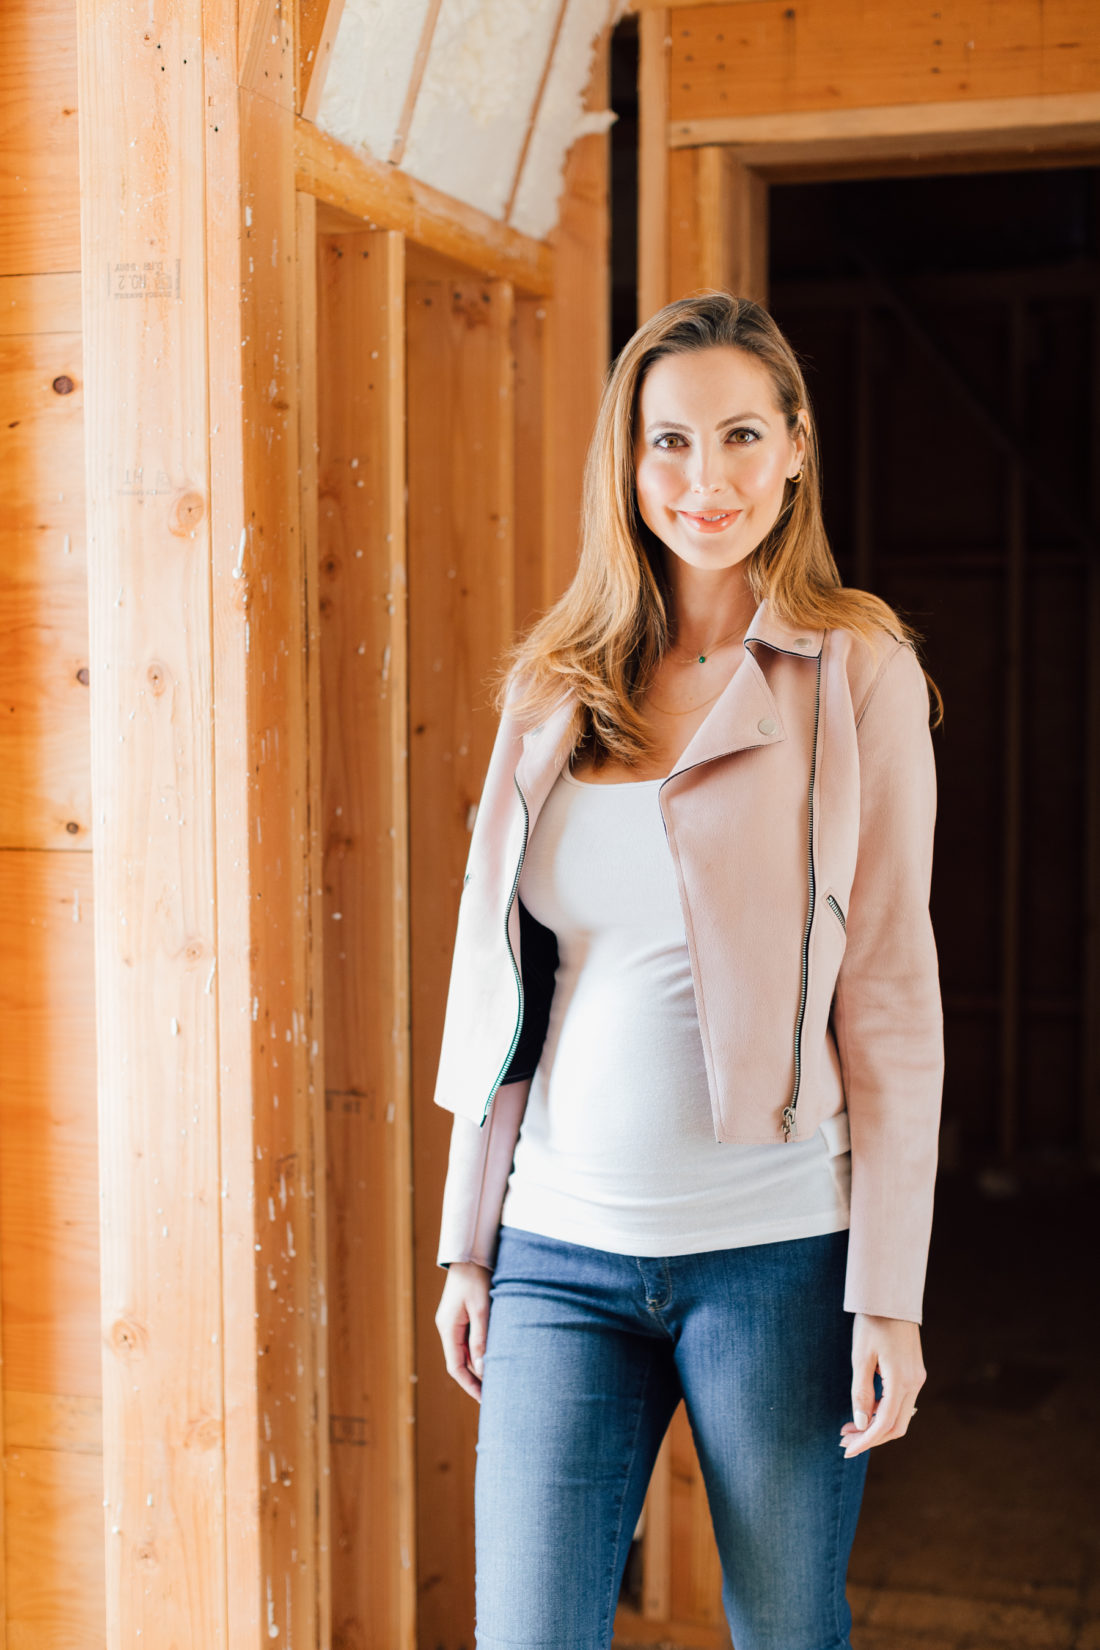 Eva Amurri shares an update on the construction of her home addition